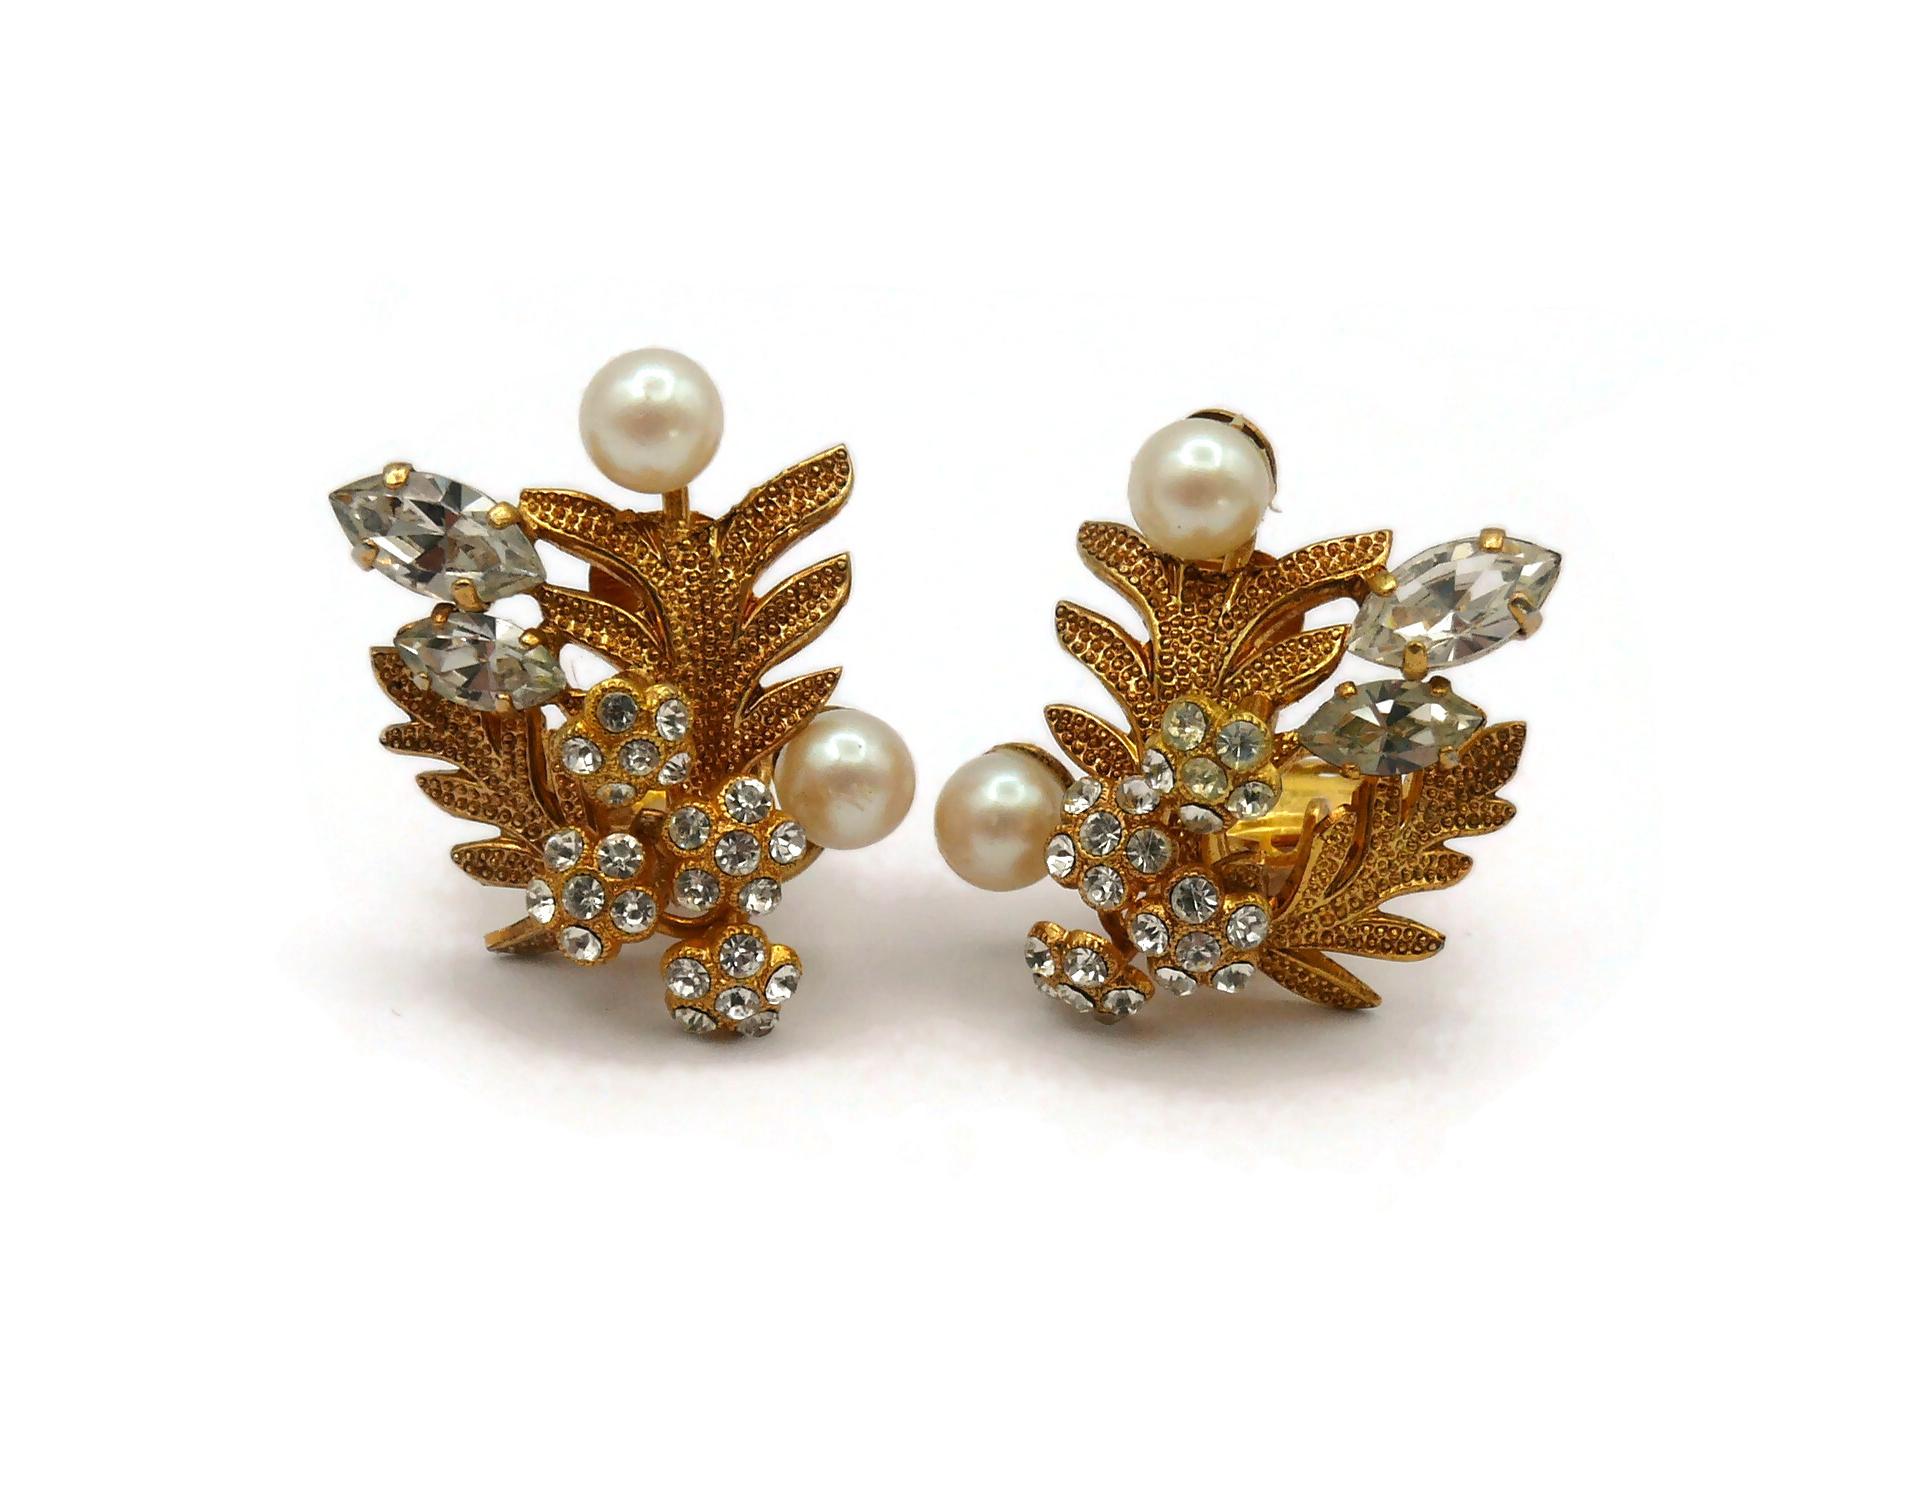 CHRISTIAN DIOR vintage gold tone floral clip-on earrings embellished with faux pearls and clear crystals.

Embossed  CHR. DIOR 1968 Germany.

Indicative measurements : max. height approx 2.5 cm (0.98 inch) / max. width approx. 2.4 cm (0.94